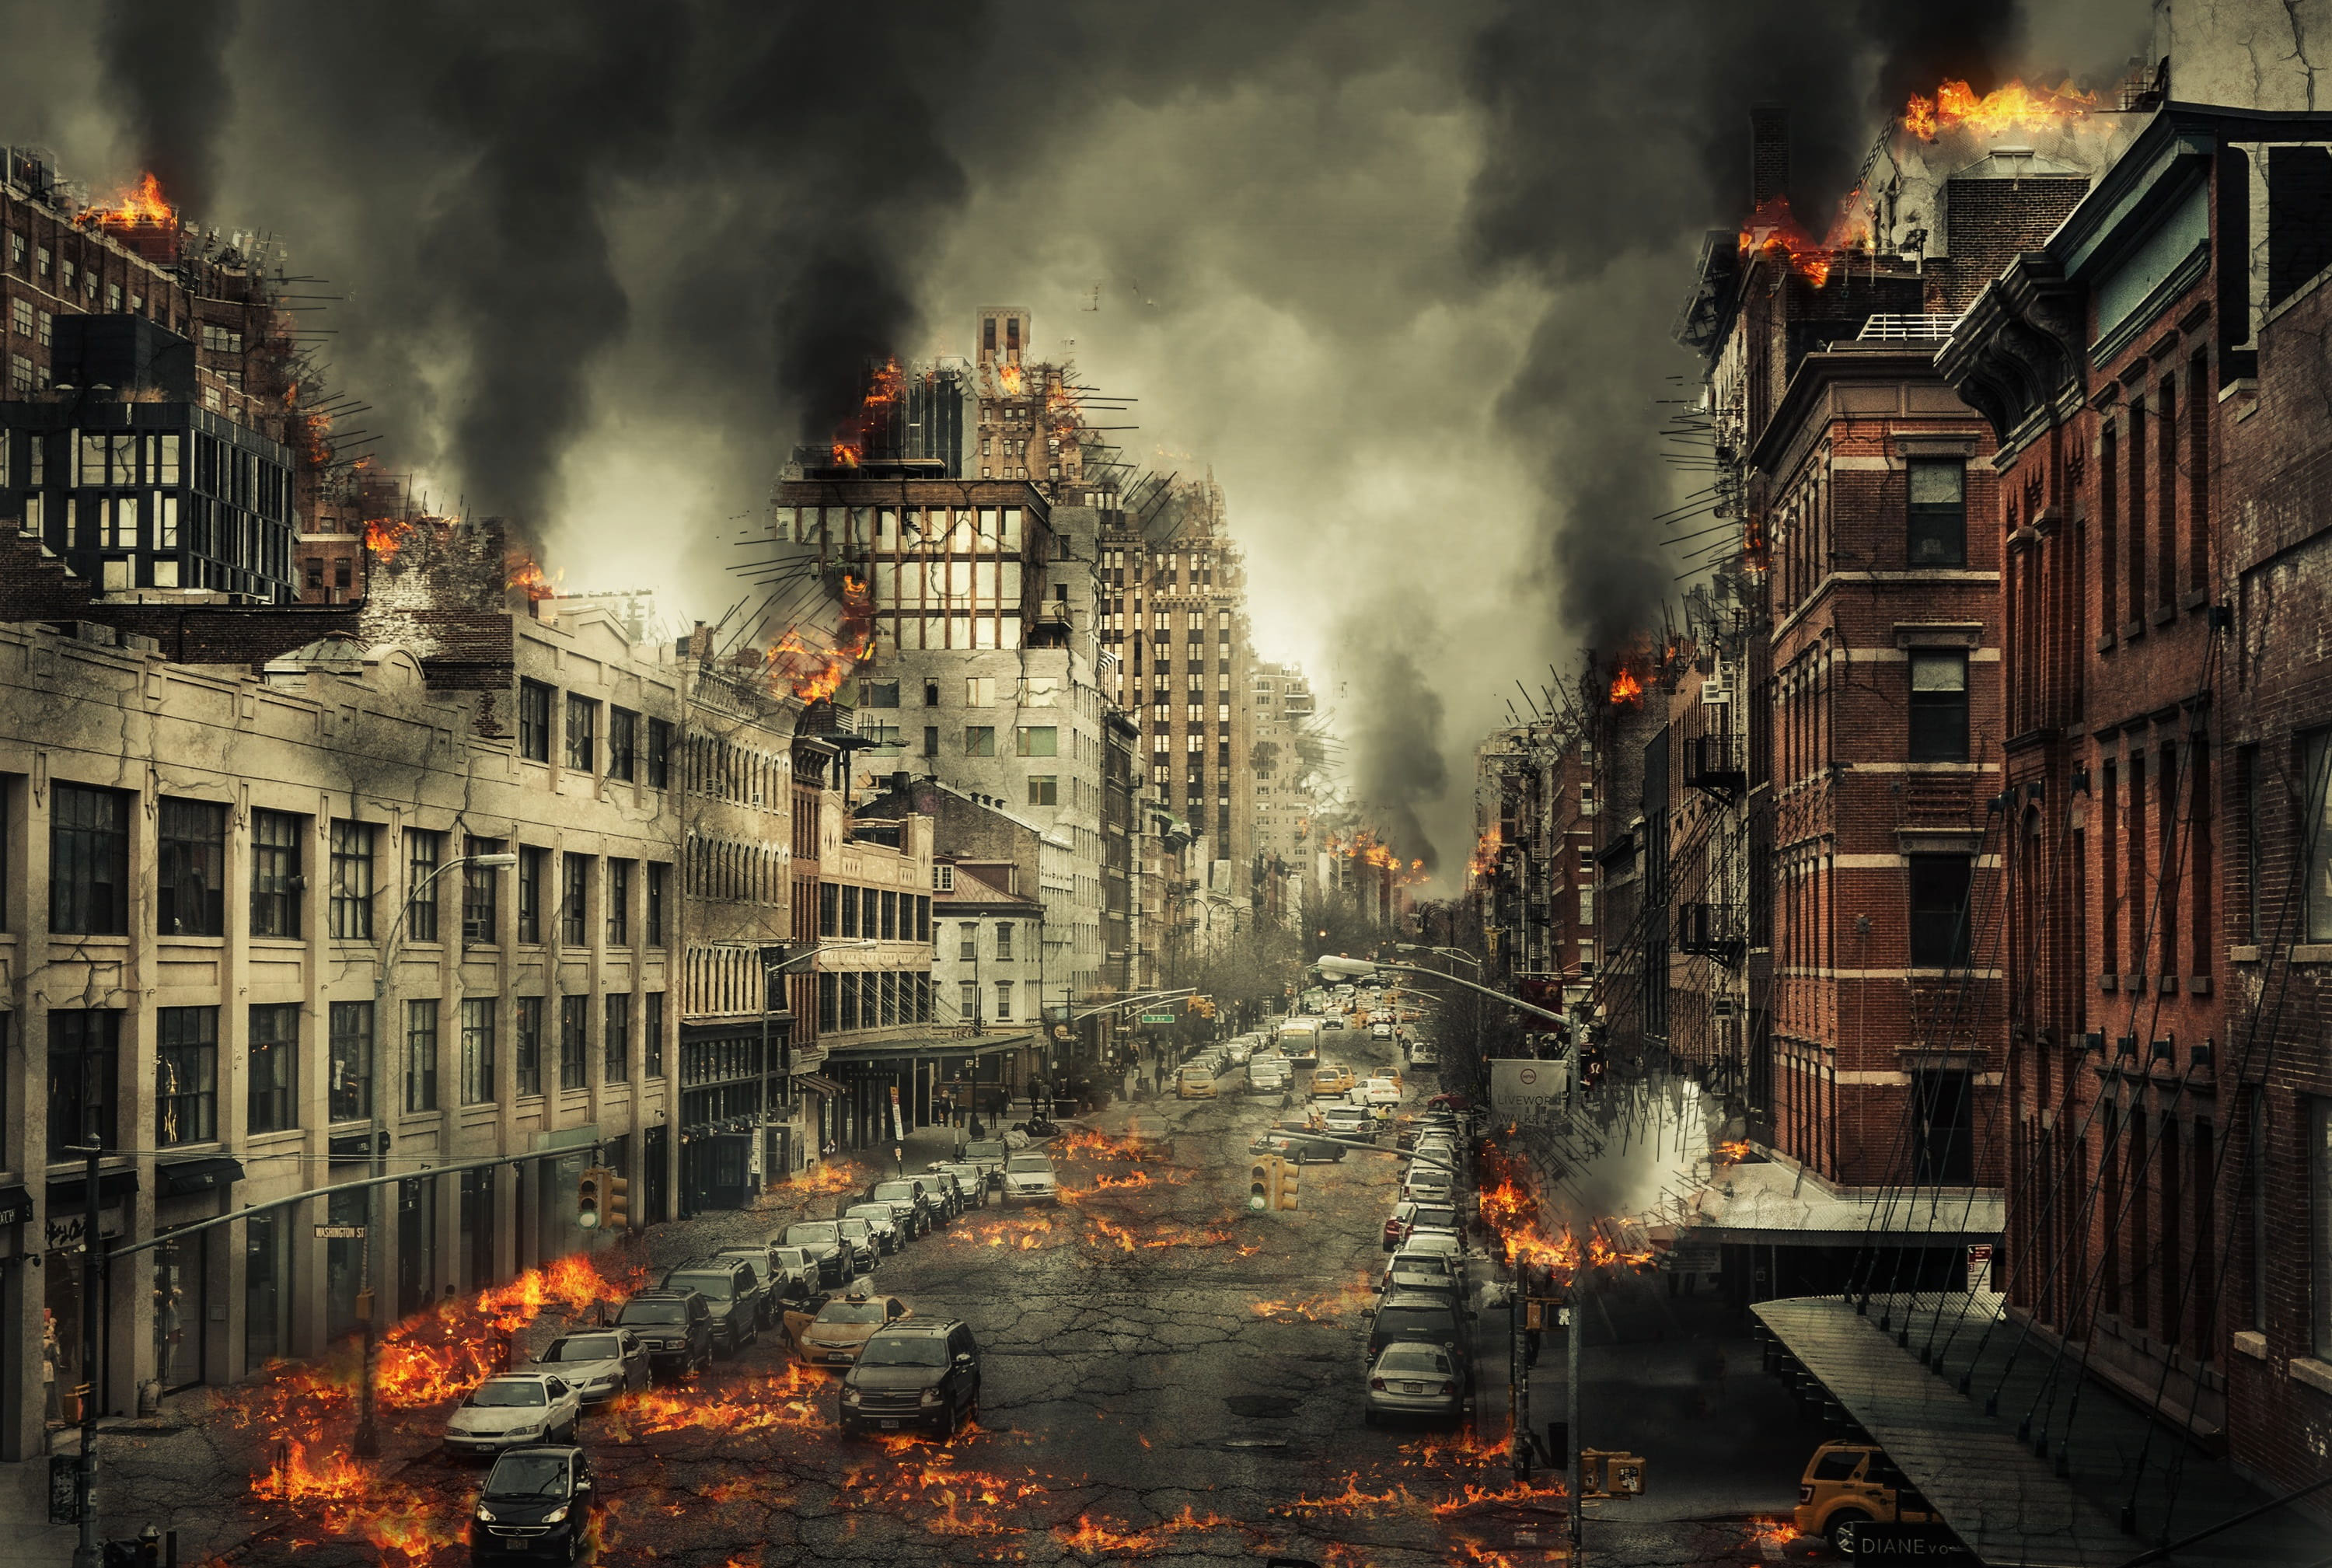 Wallpaper Burning City With With Dark Smoke Illustration, City, City